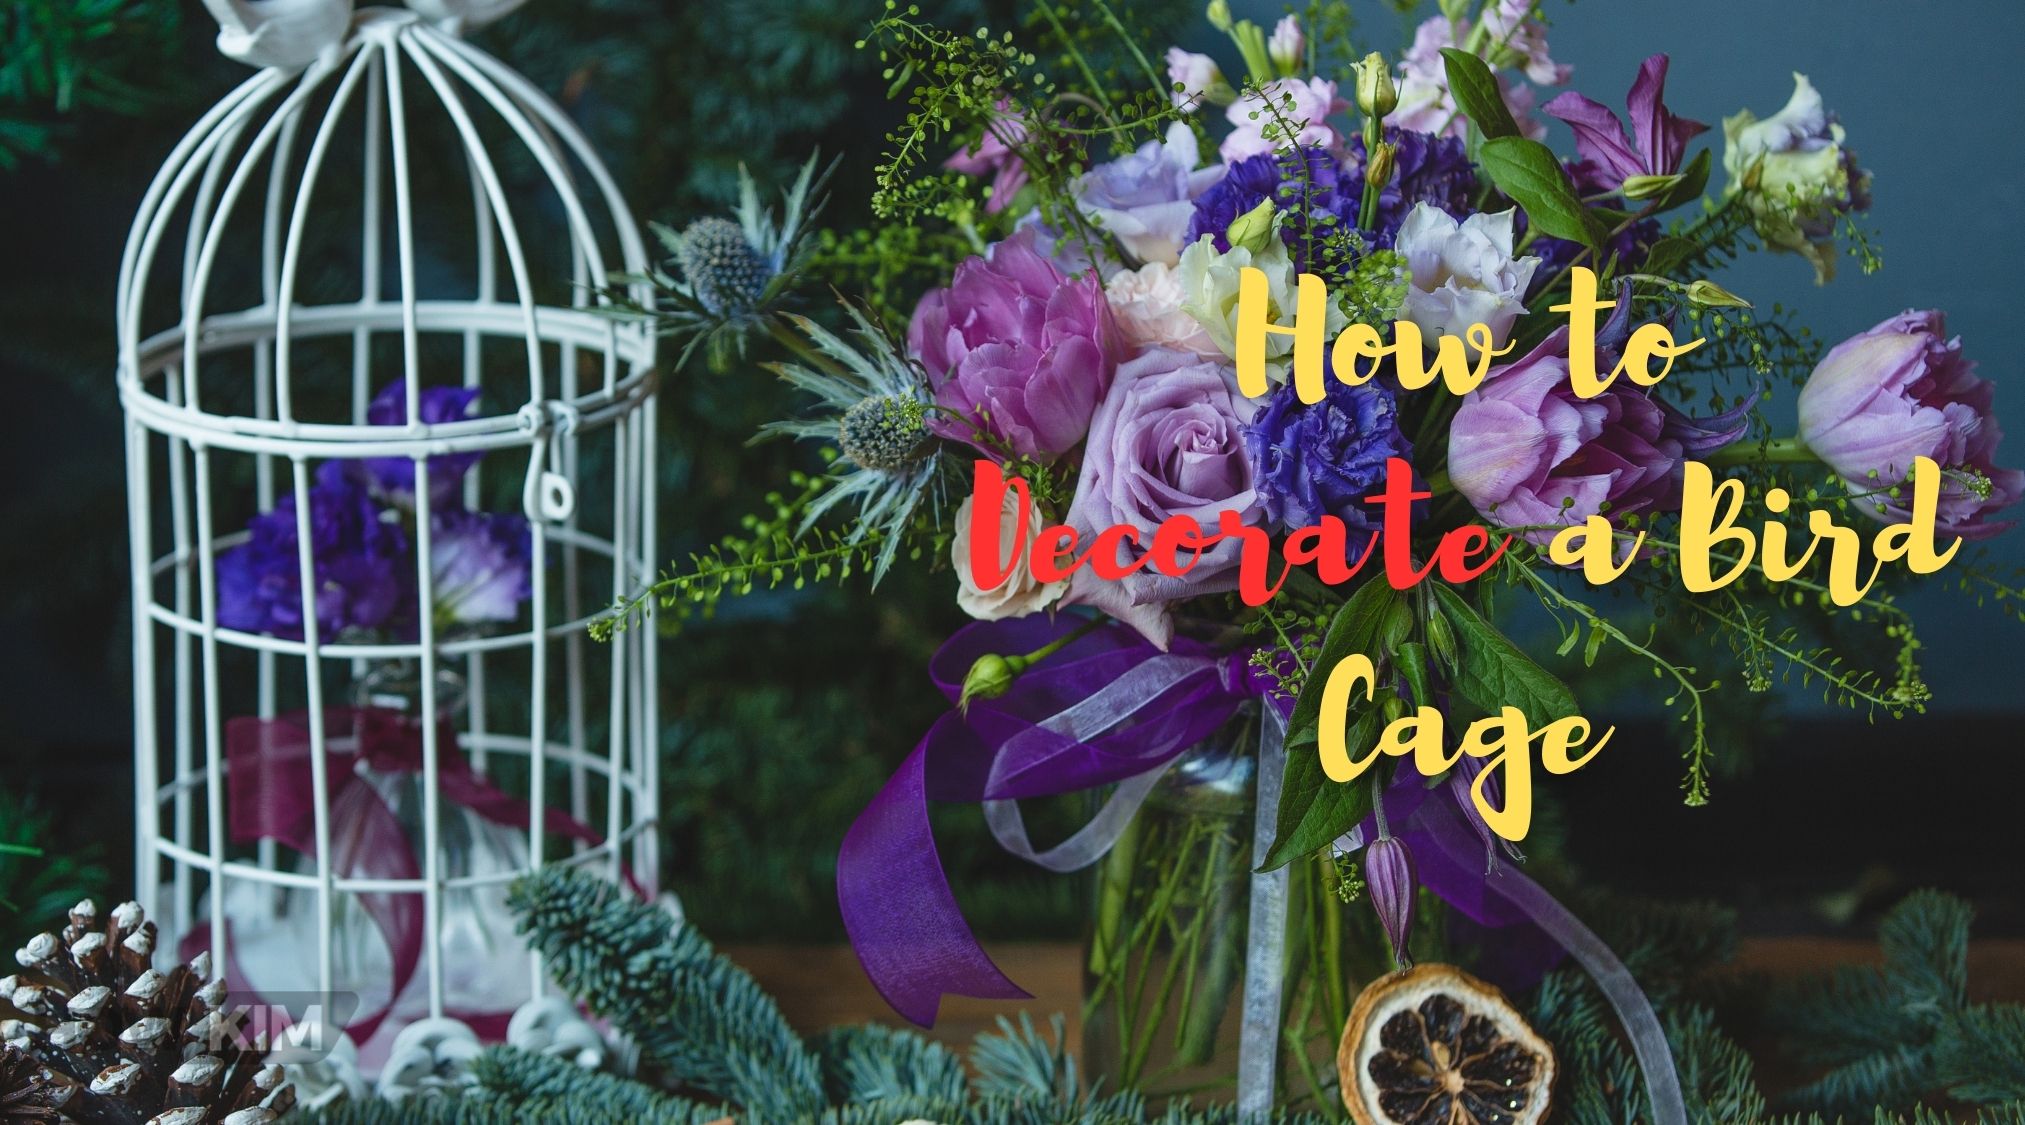 How to Decorate a Bird Cage